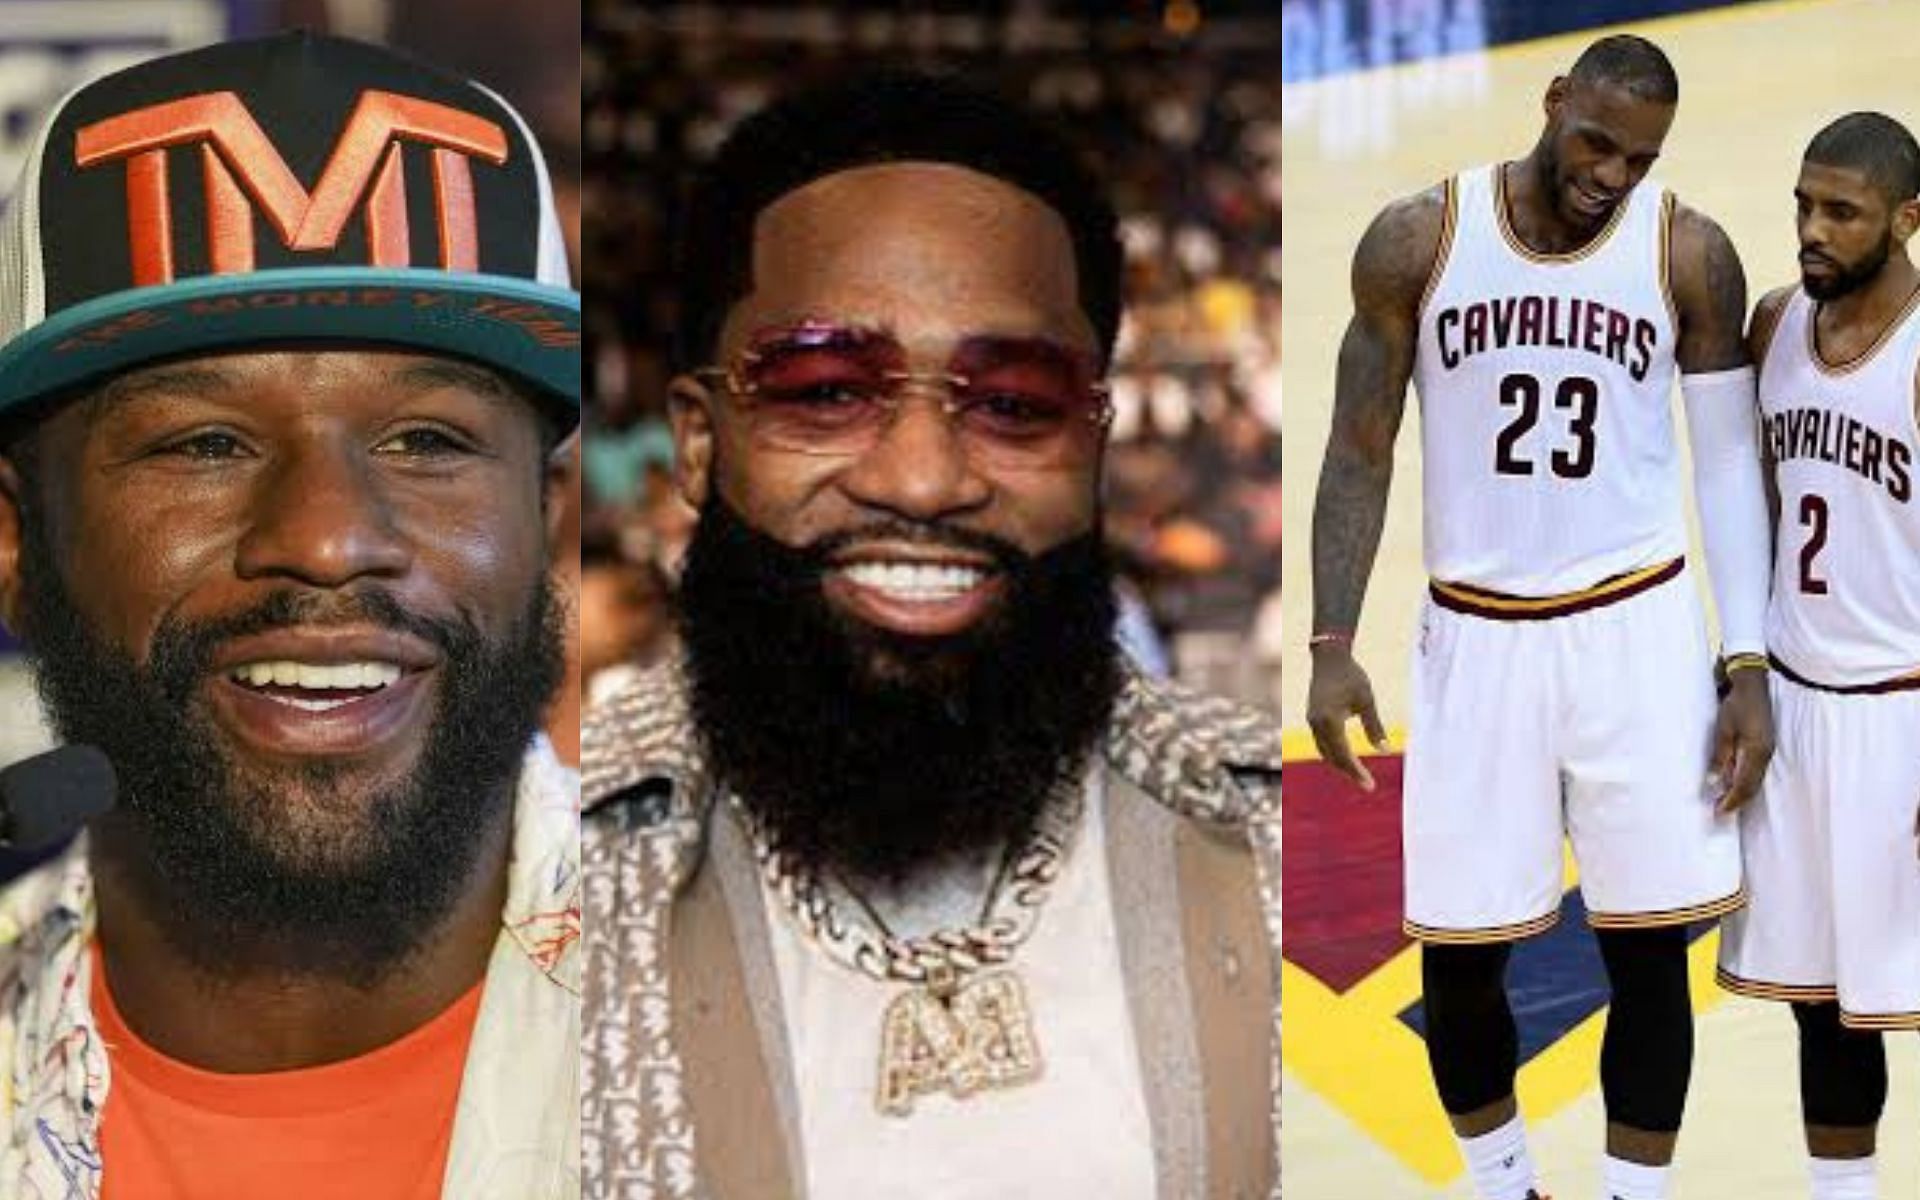 Floyd Mayweather (left), Adrien Broner (middle), LeBron James and Kyrie Irving (right)